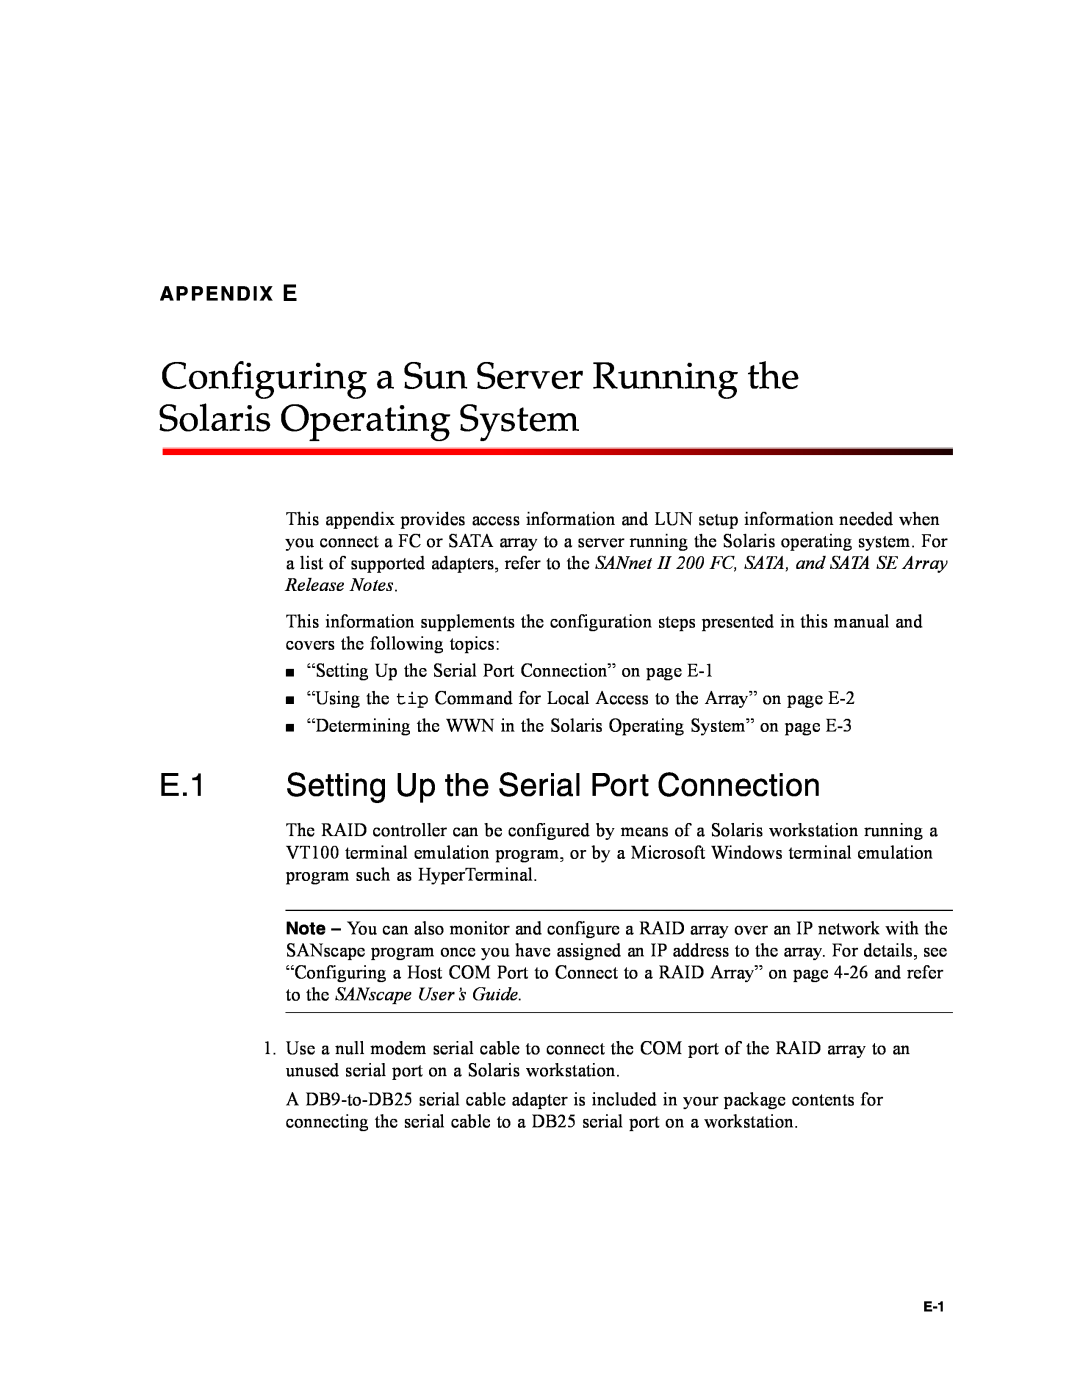 Dot Hill Systems II 200 FC service manual Configuring a Sun Server Running the Solaris Operating System, Appendix E 